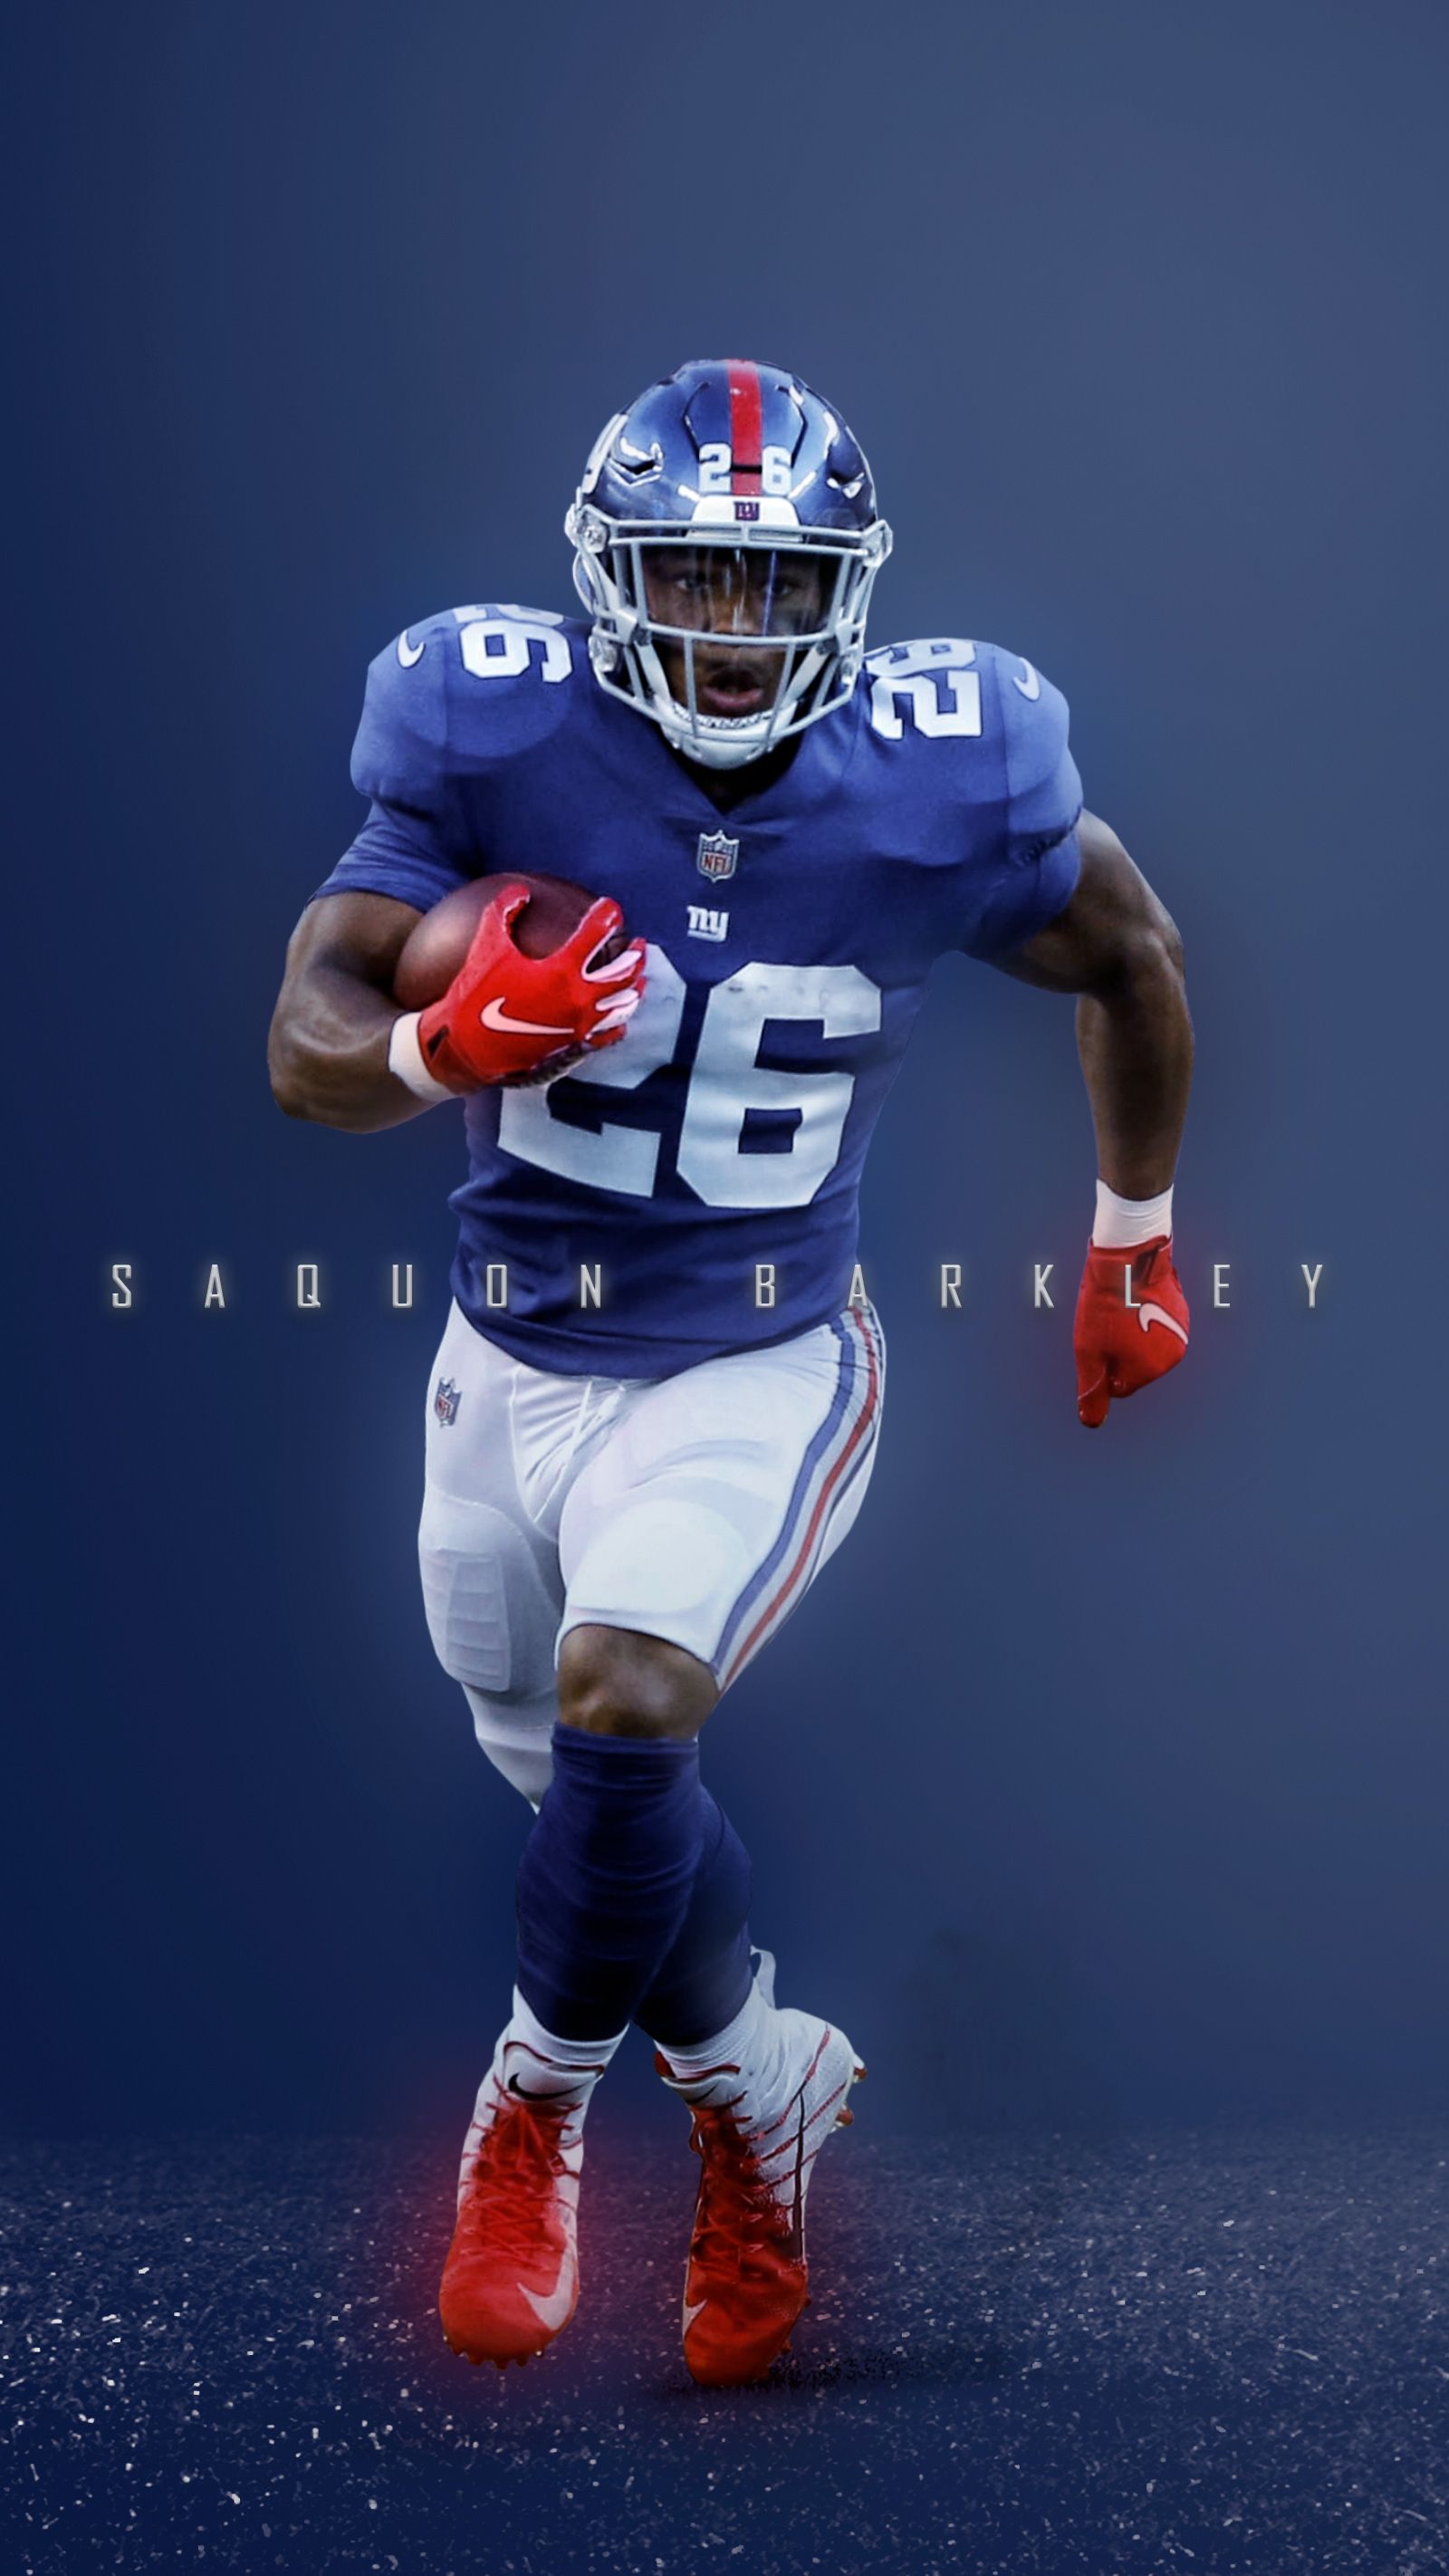 HD wallpaper New York Giants player touchdown American football NFL  athletes  Wallpaper Flare